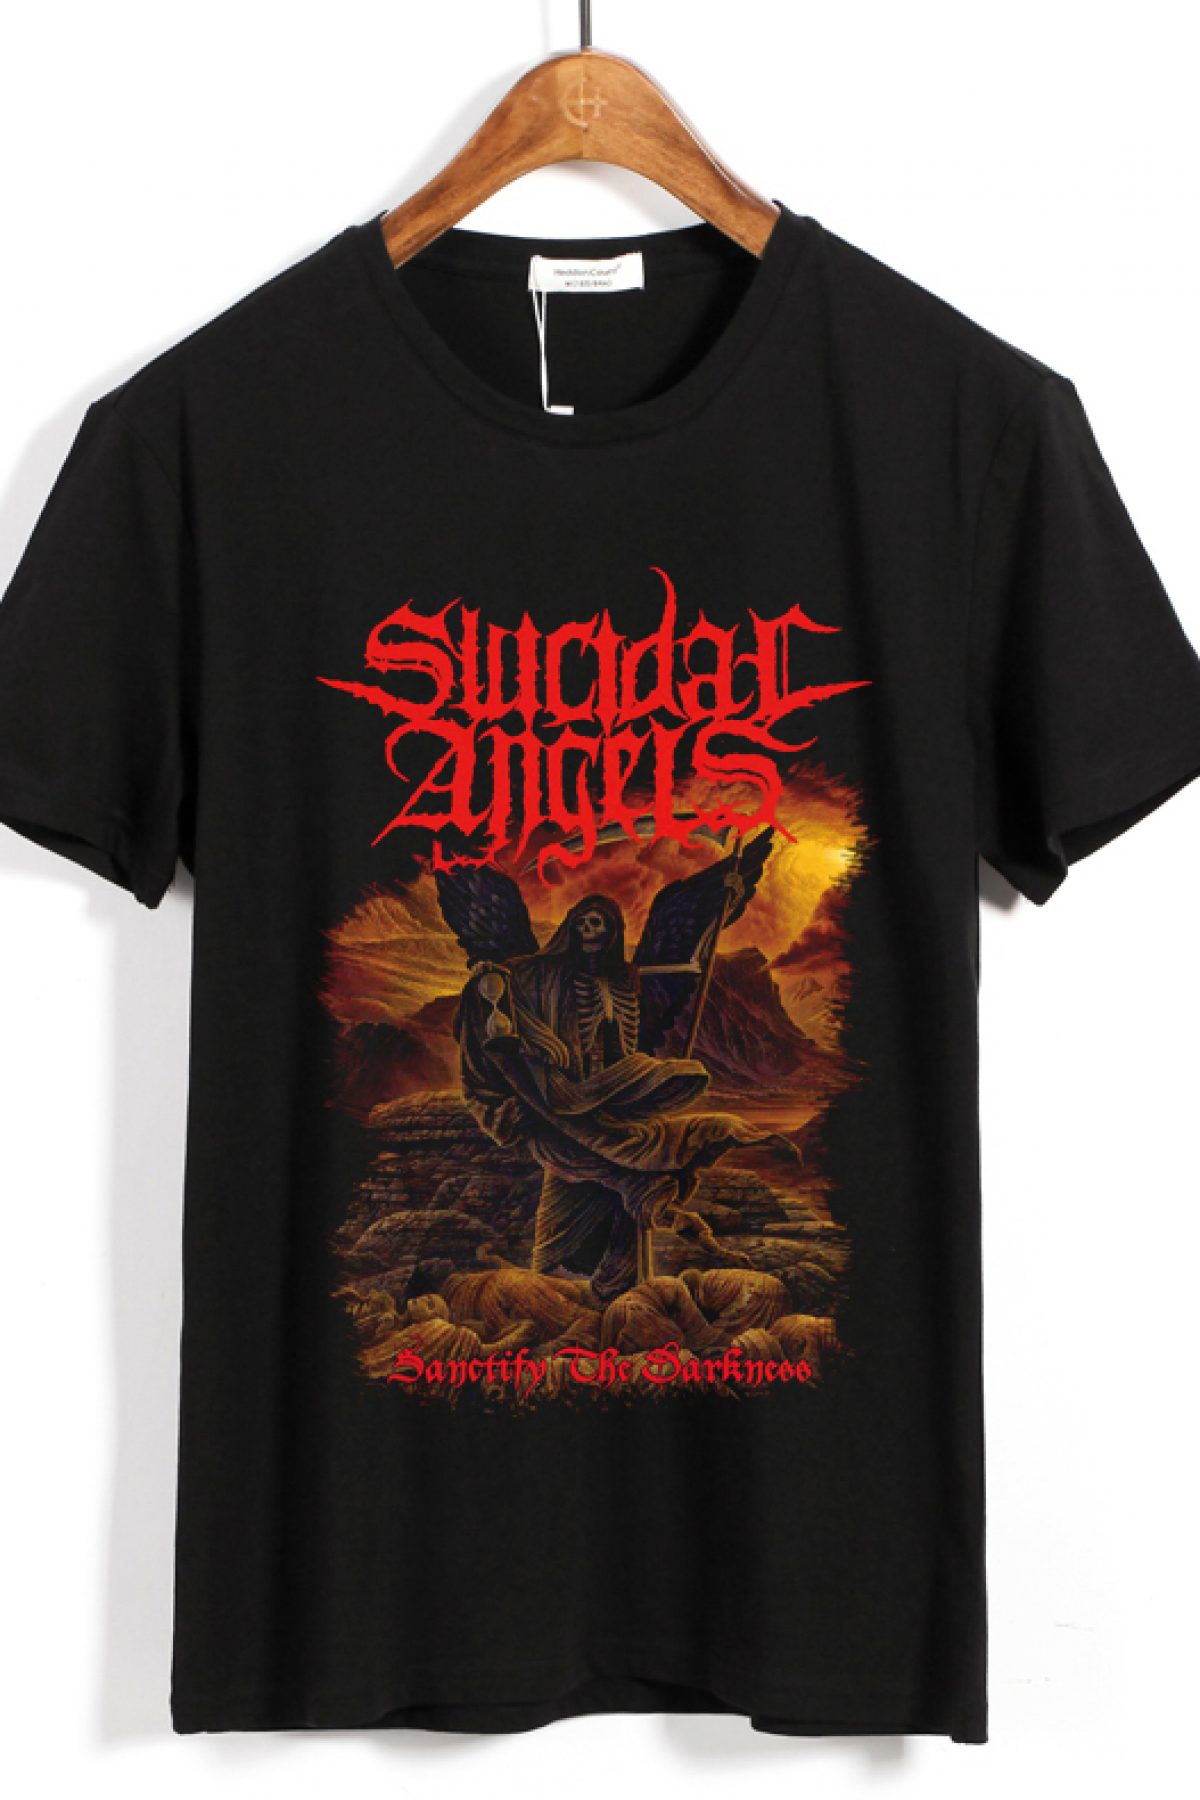 T-shirt Suicidal Angels Sanctify The Darkness - IdolStore